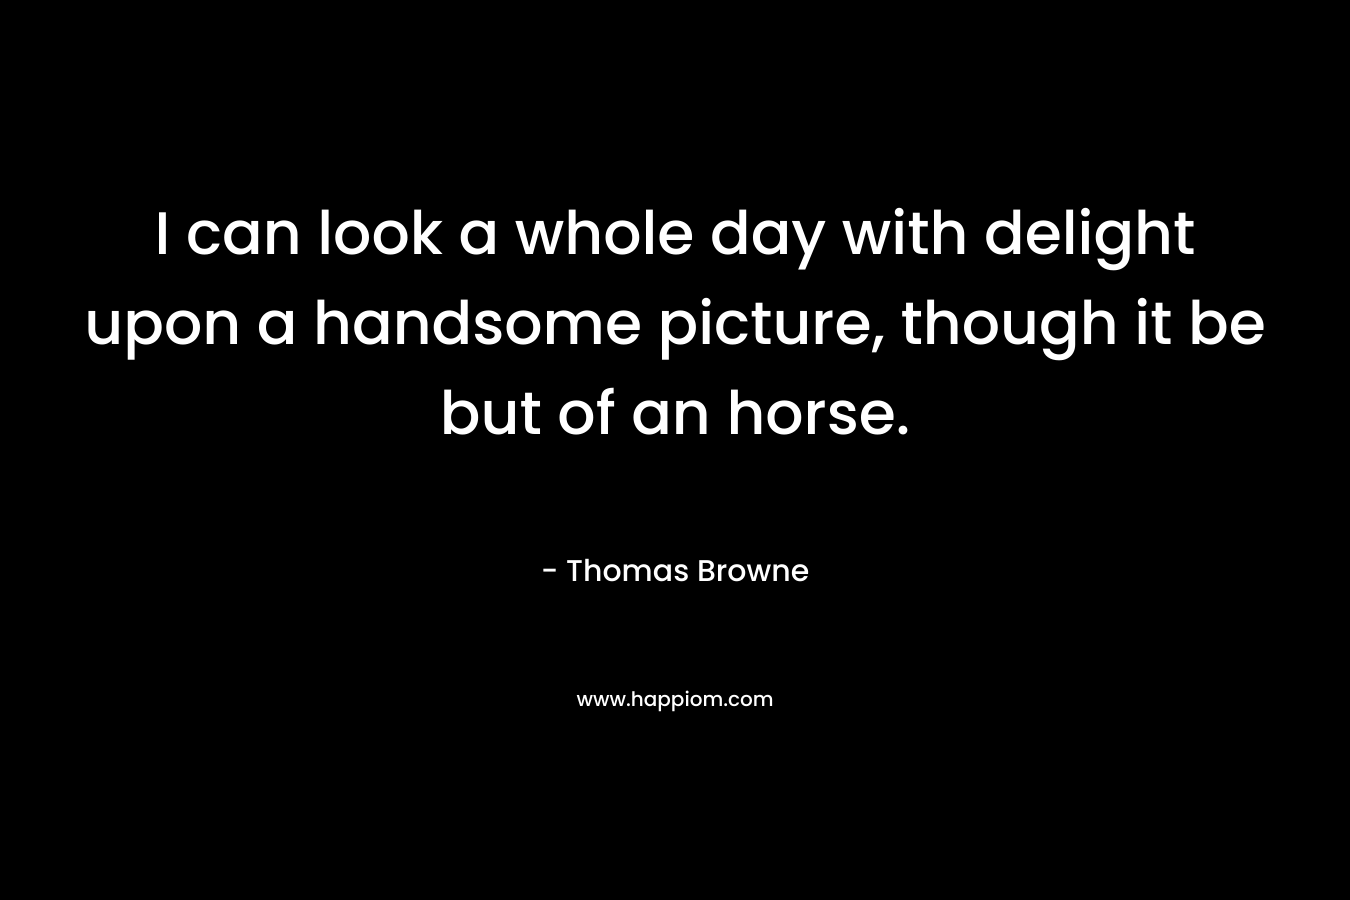 I can look a whole day with delight upon a handsome picture, though it be but of an horse. – Thomas Browne